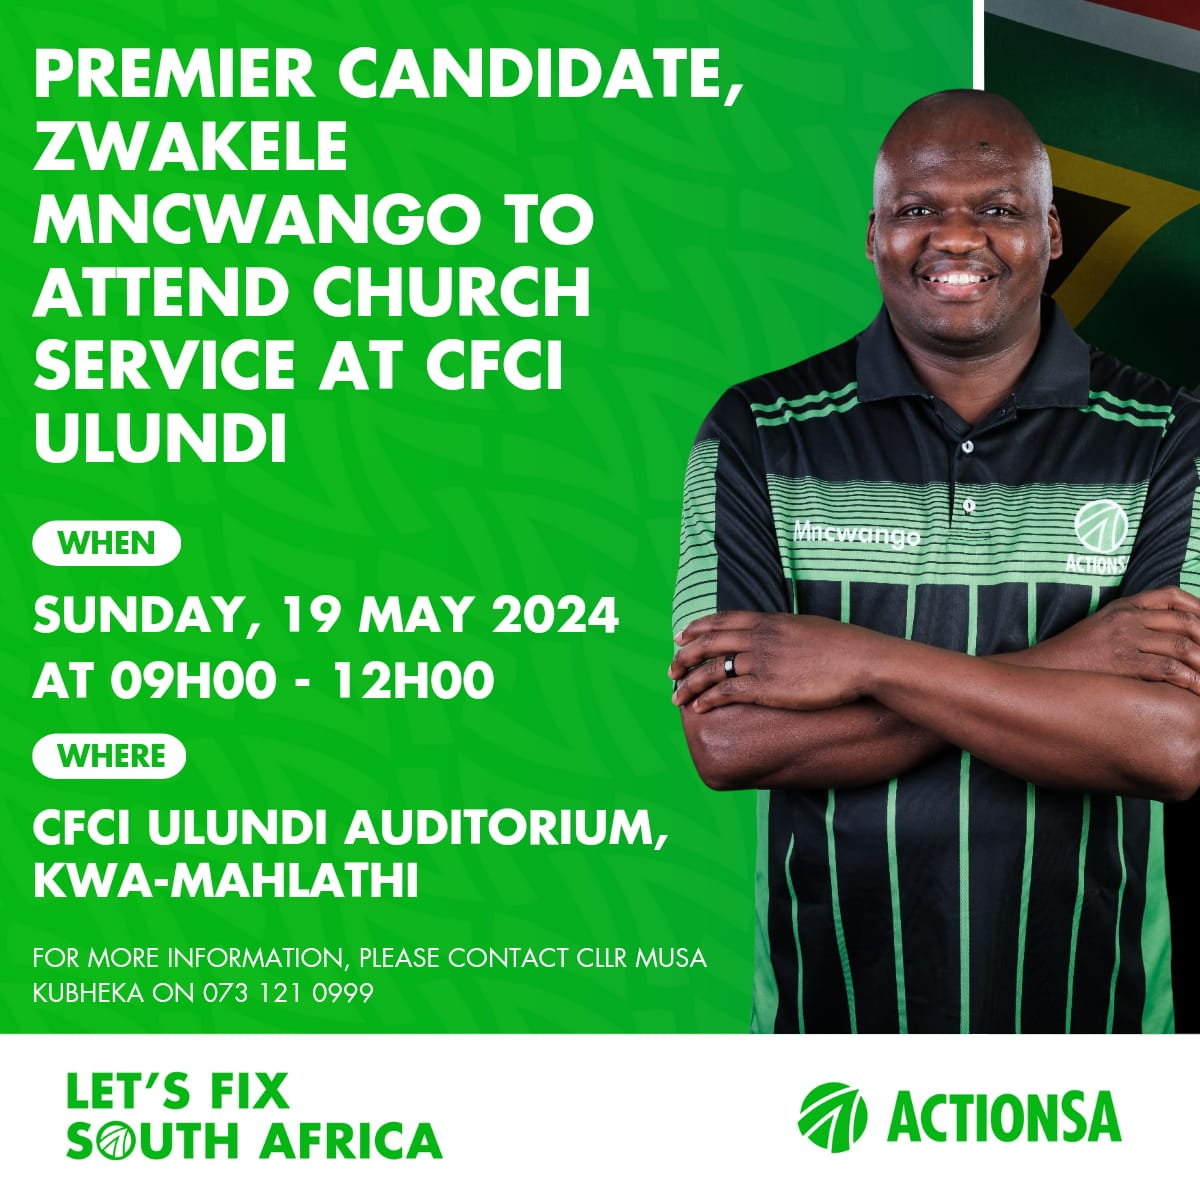 As May 29th approaches, we remain dedicated to our mission of praying for a safe and fair election period in our nation. 
May the Lord bless and protect all our nation's leaders in His holy name.

#ZwakeleMncwango4Premier #LetsFixOurProvince #OnlyActionWillFixSA #YourKZNOwnIt